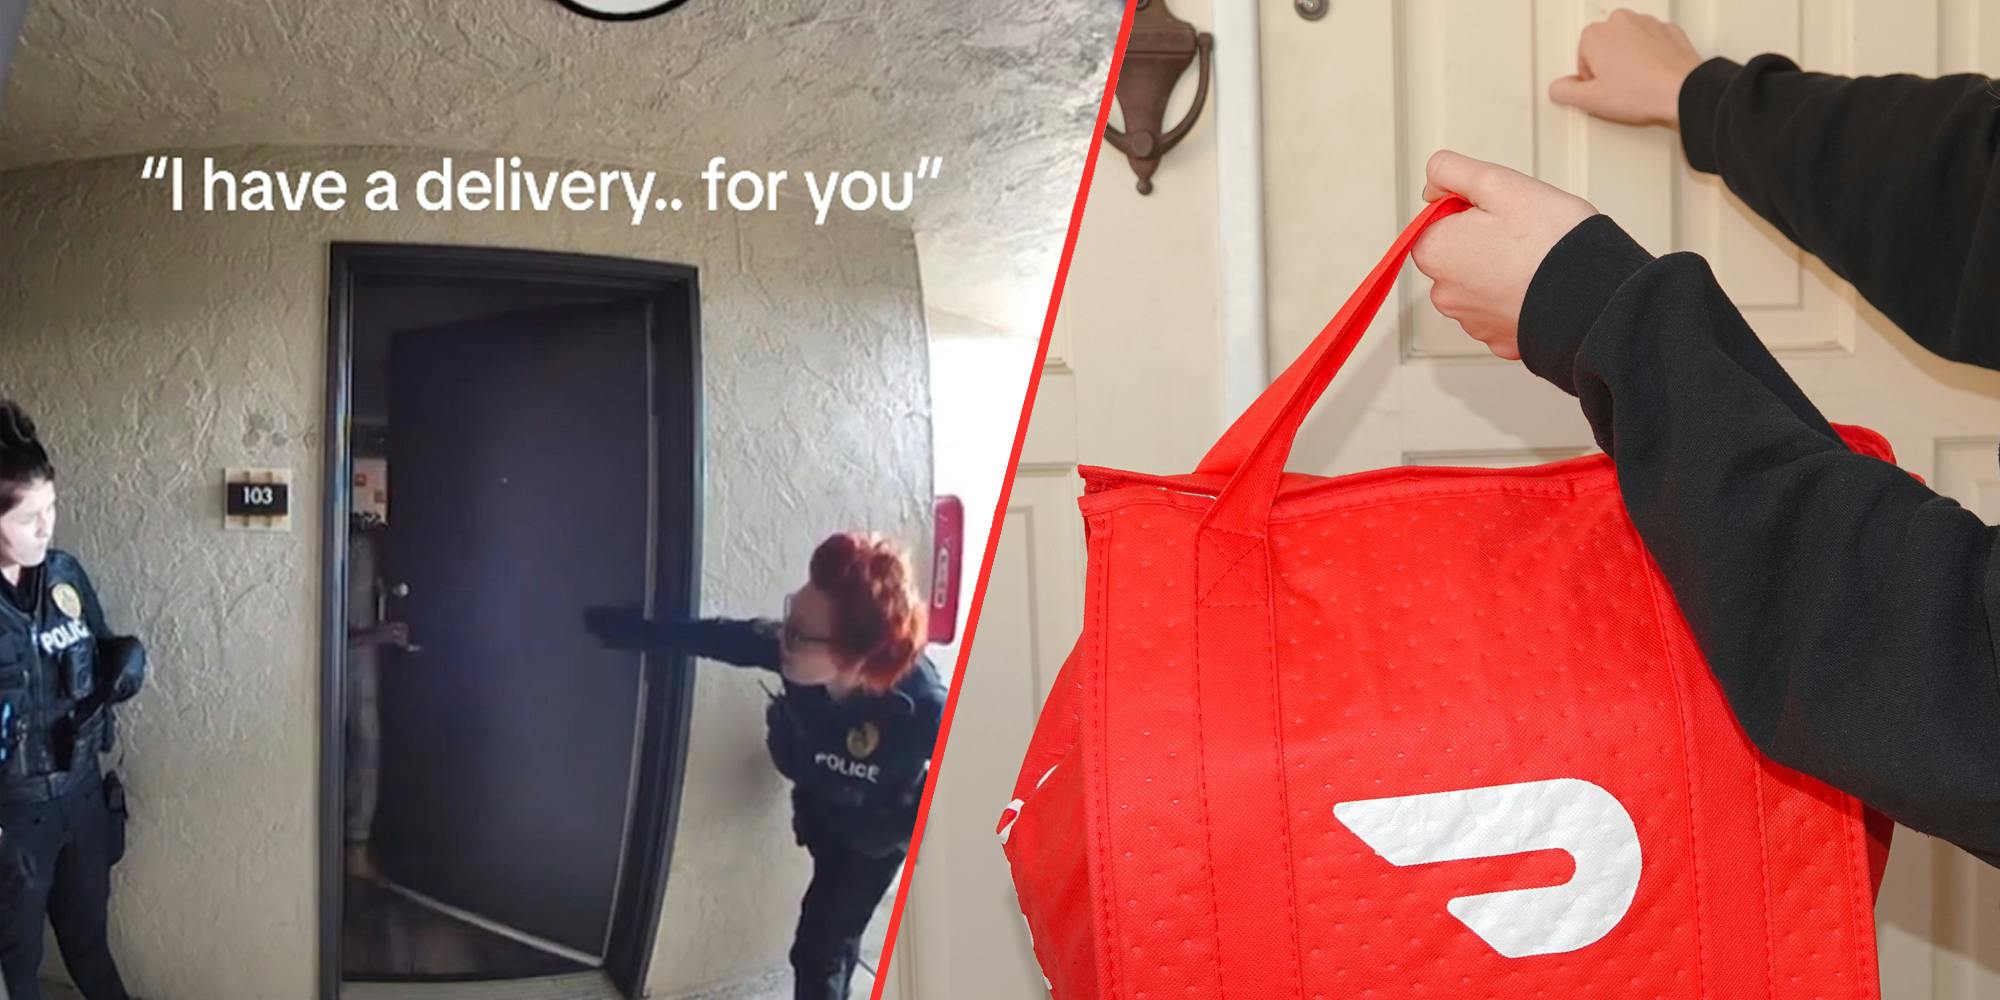 cops at door with caption "I have a delivery.. for you" (l) DoorDash bag in hand as person knocks on door (r)